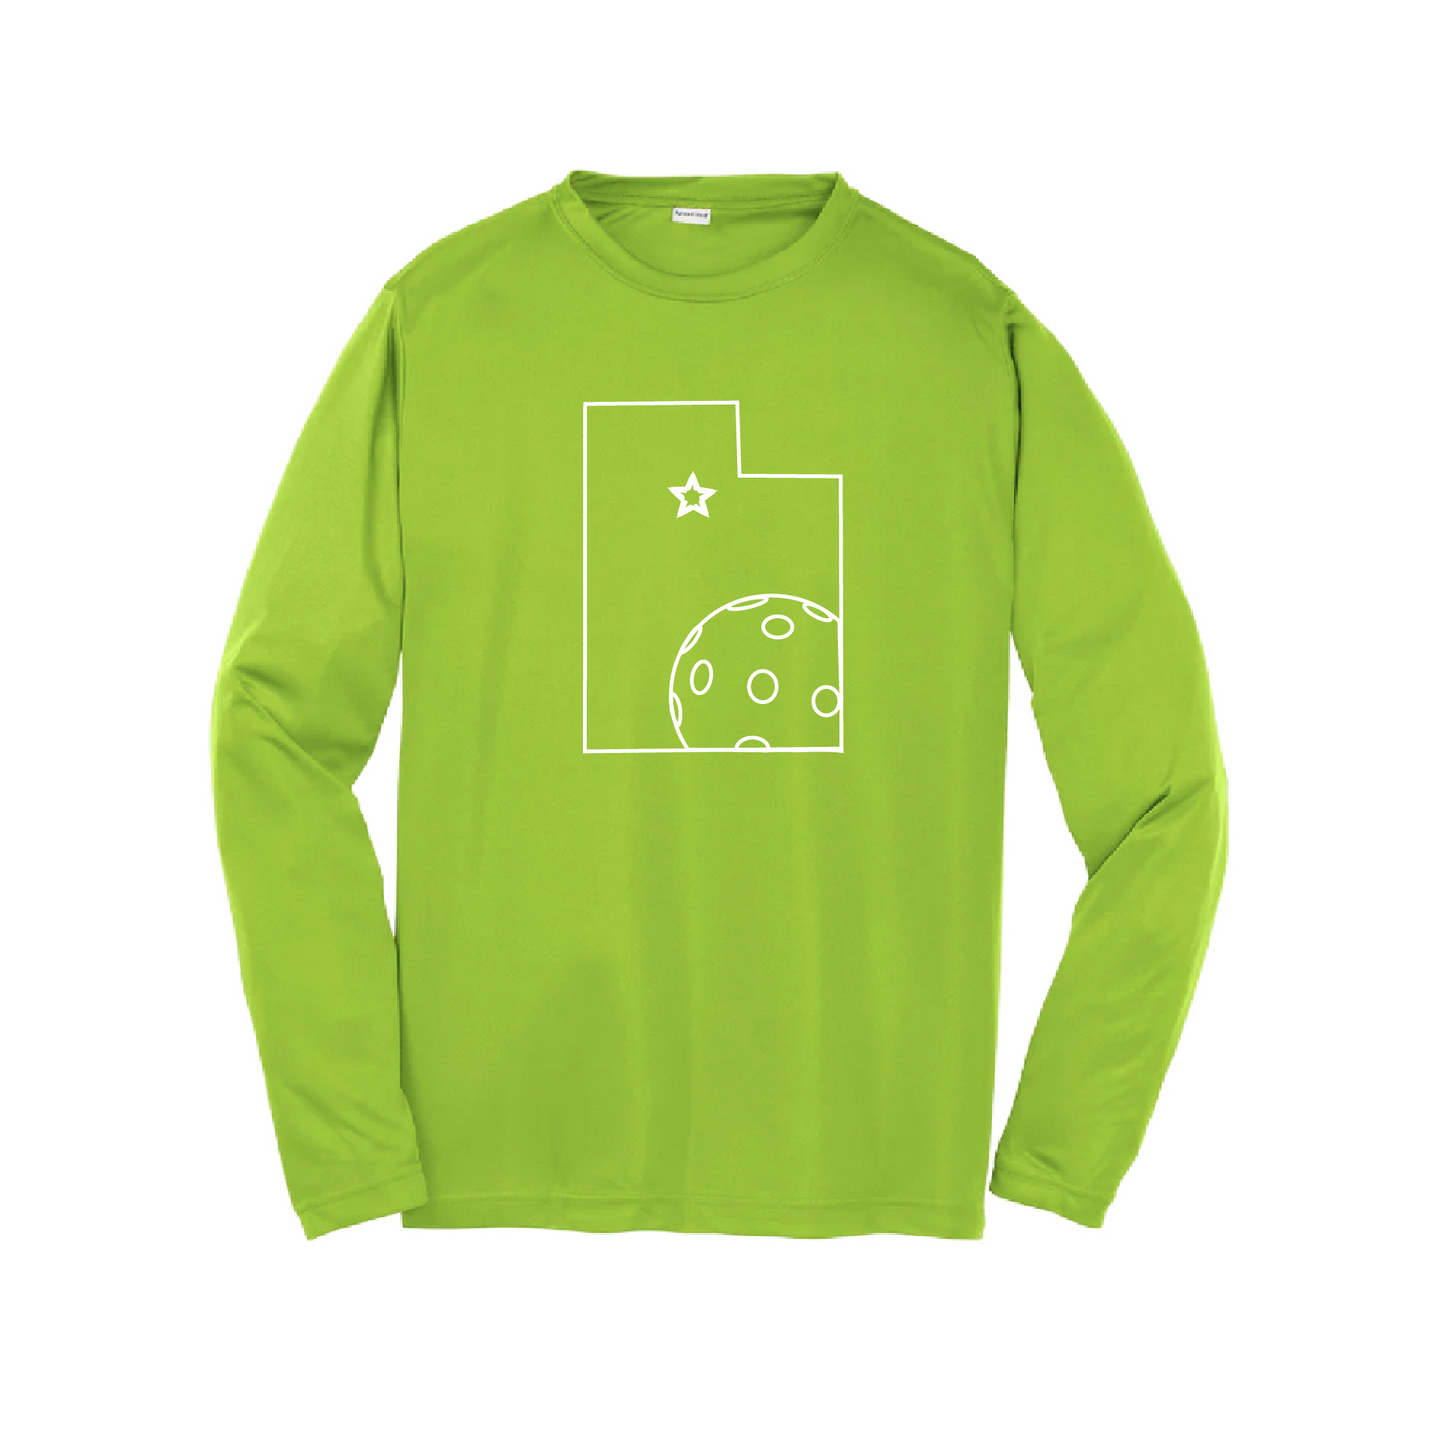 Pickleball Design: Utah with Star and Ball  Style:  Men's Long-Sleeve  Shirts are lightweight, roomy and highly breathable. These moisture-wicking shirts are designed for athletic performance. They feature PosiCharge technology to lock in color and prevent logos from fading. Removable tag and set-in sleeves for comfort.